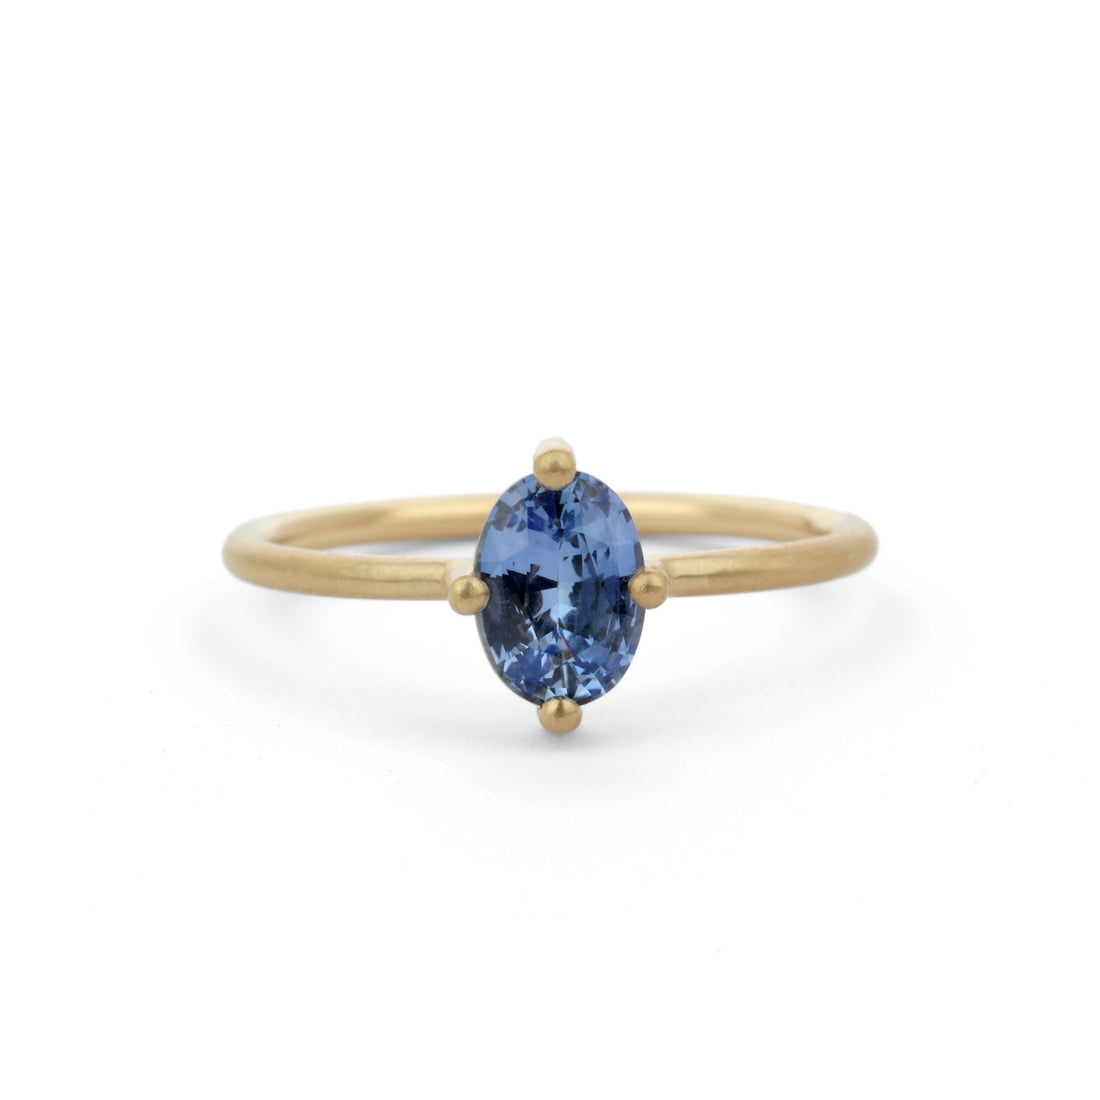  Oval Blue Sapphire Solo Ring by Shimell & Madden | The Cut London